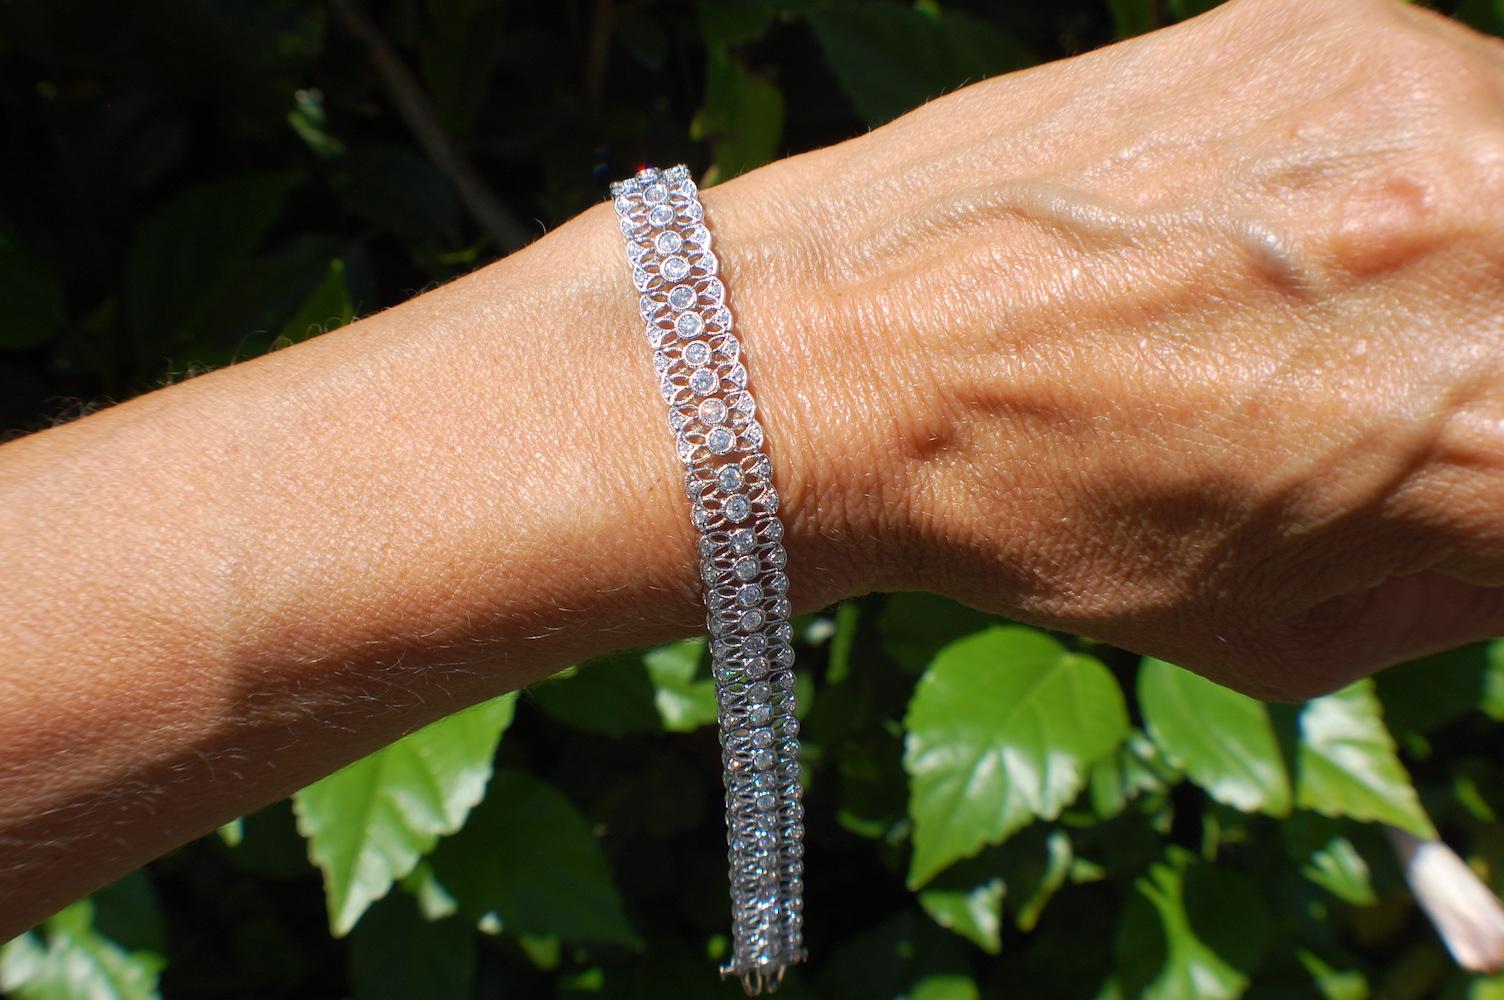 Mesh, Diamond Modern Style Tennis 3.08 Carat Bracelet, 18 Karat White Gold
This sticking bracelet is gorgeous and  covered with diamonds down the center set in bezel settings and along the edge of each side. The diamond weight is estimated at 3.08